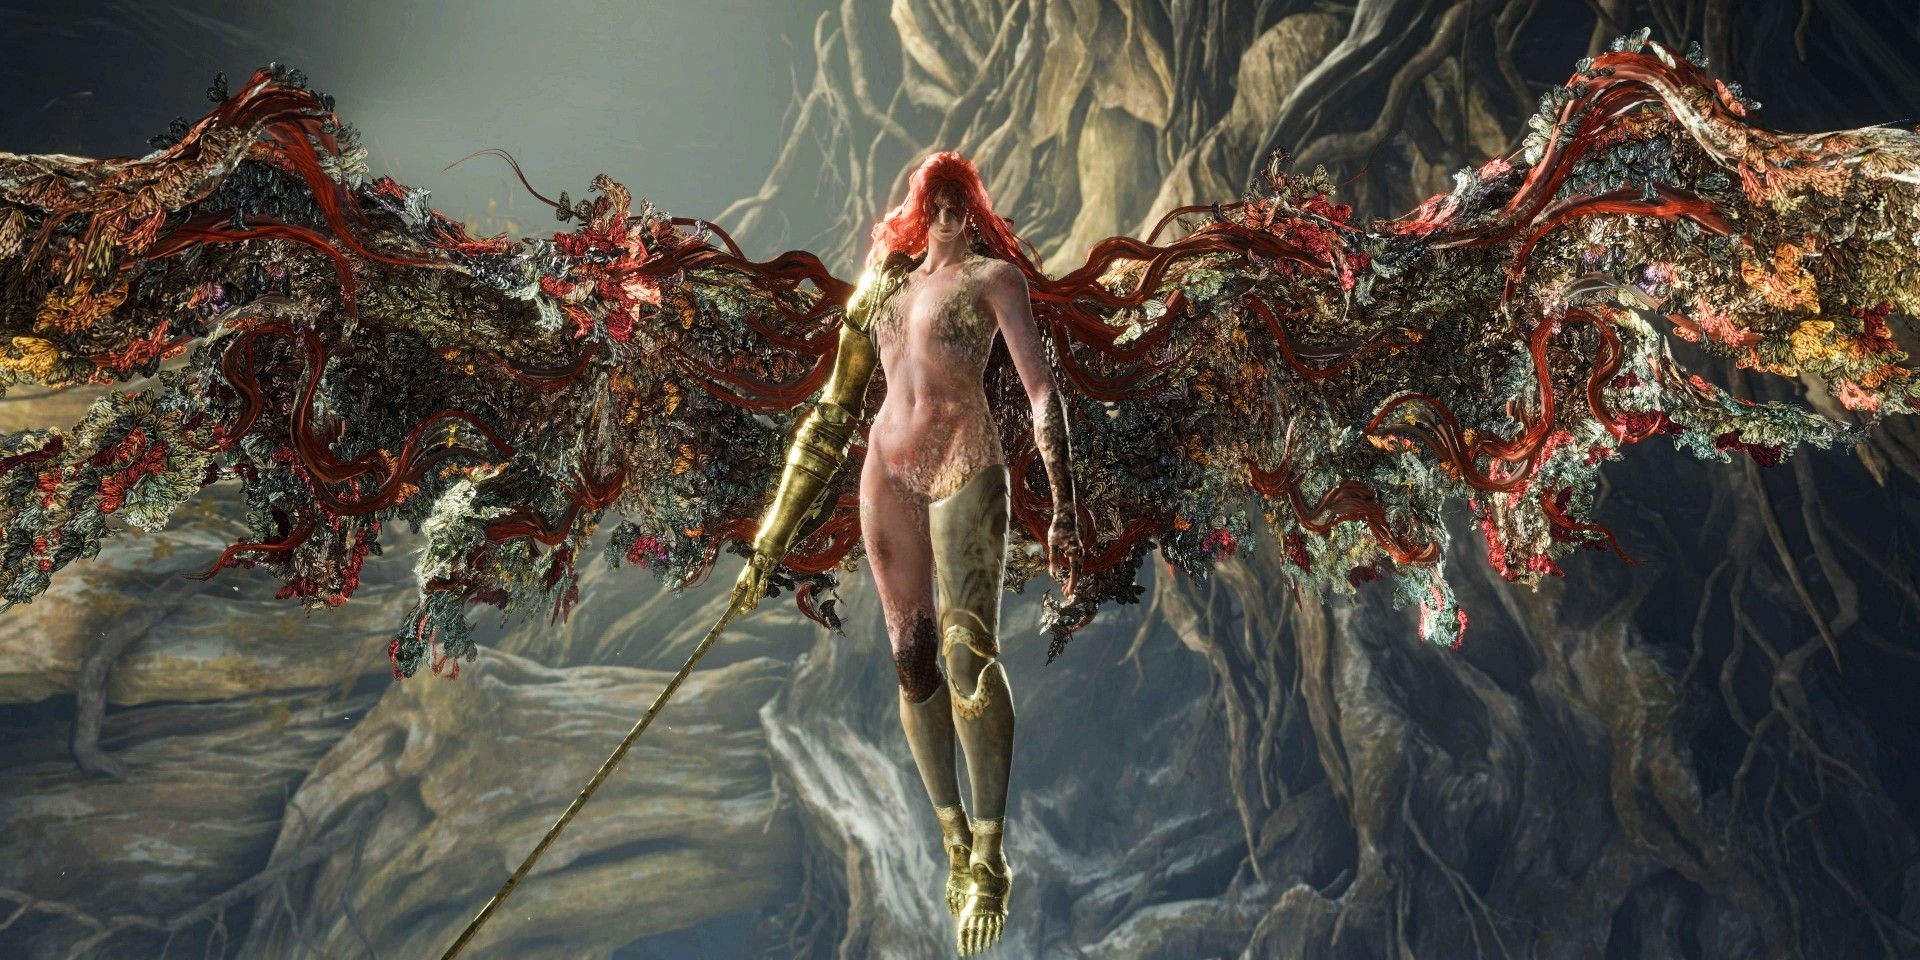 Screenshot of Malenia’s appearance during the second phase of the boss battle, as seen in Elden Ring.